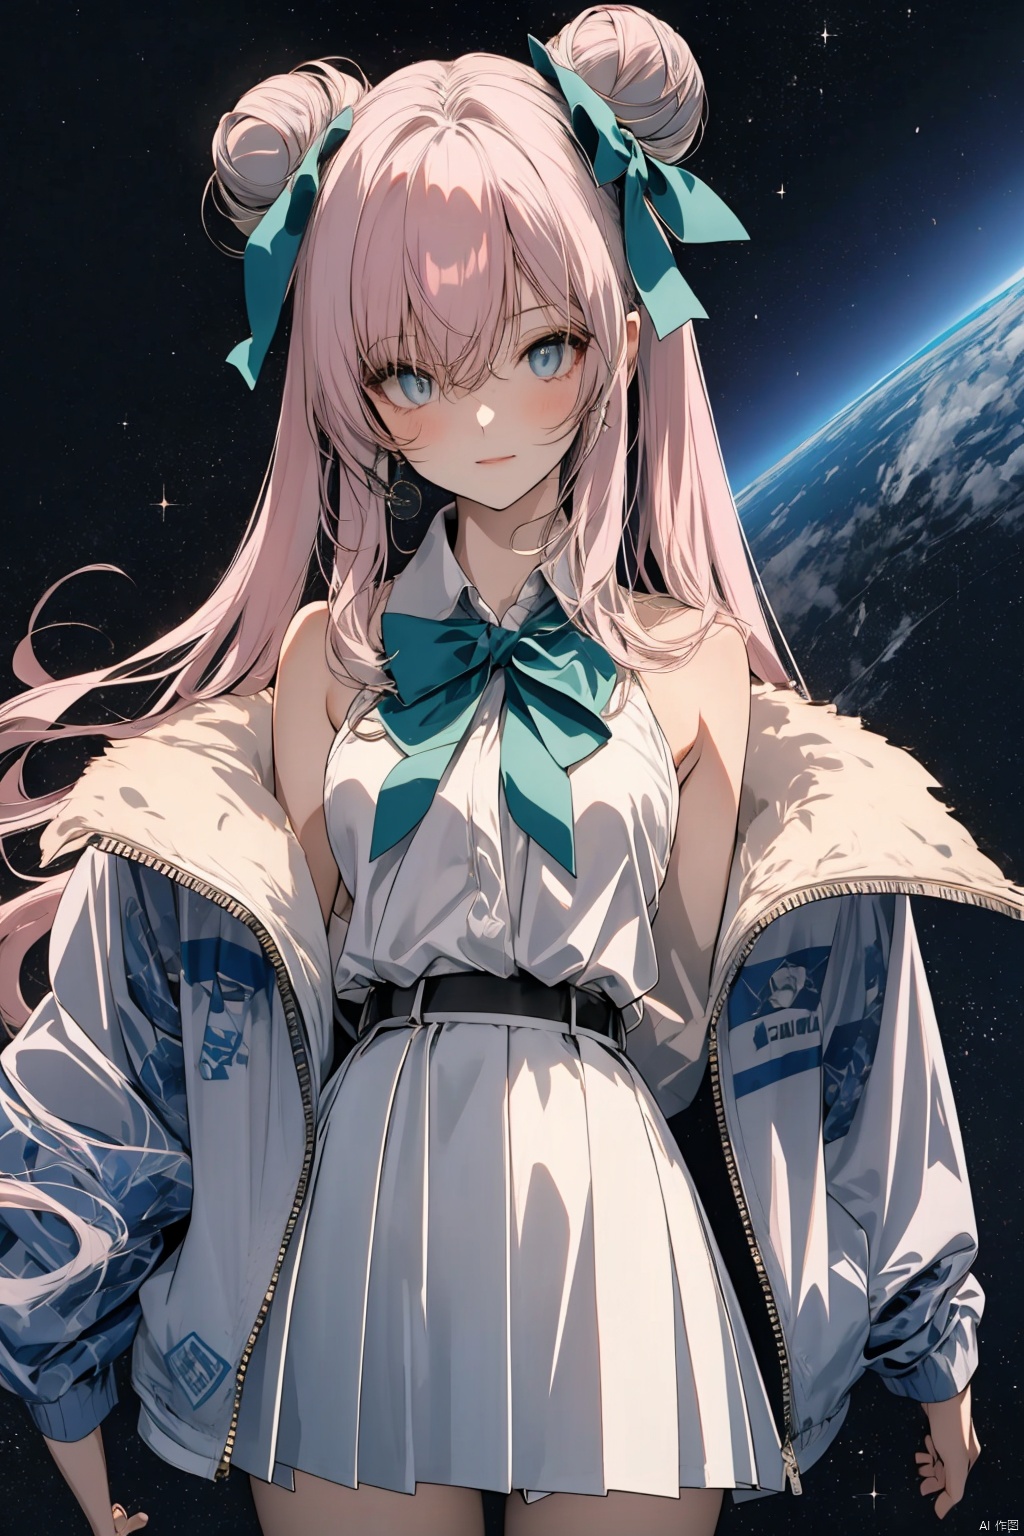  no cloth, cute girl，Long hair, light blue hair, pink streaks of hair, space bun hairstyle, flower hairpin, blue eyes, long-sleeve, button-up white shirt, a gray jacket with blue-green stripes, a red bow, dark blue-green pleated skirt, school background, add_detail:1, add_detail:0, add_detail:0.5